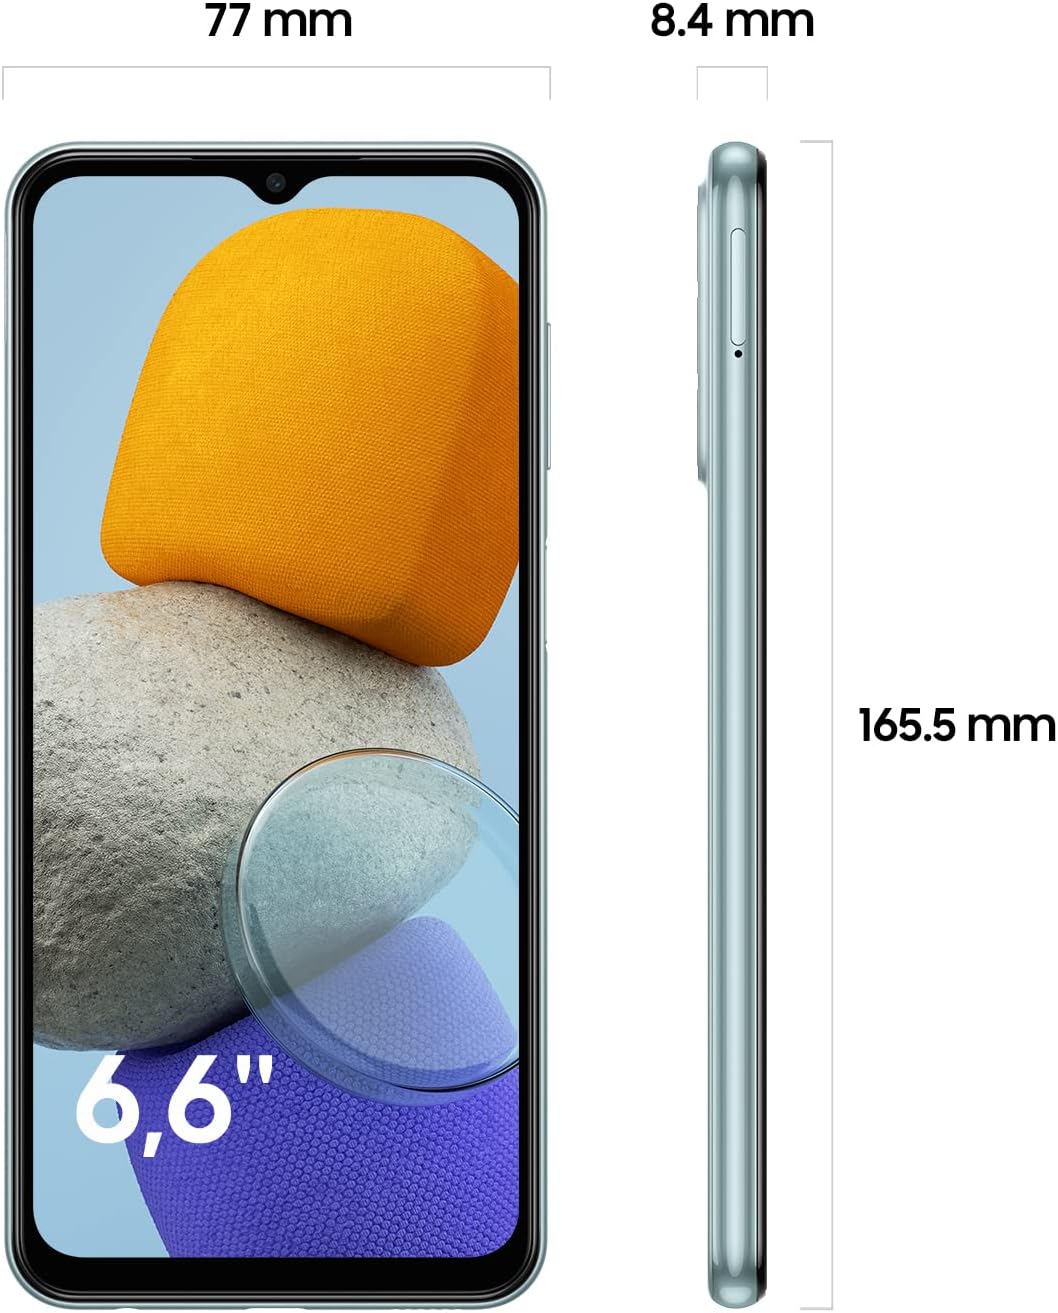 Samsung Galaxy M23 5G Mobile Phone SIM Free Android Smartphone 4GB RAM 128GB Storage Light Blue [Amazon Exclusive]   Import  Single ASIN  Import  Multiple ASIN ×Product customization General Description Gallery Reviews Variations Add - Amazing Gadgets Outlet